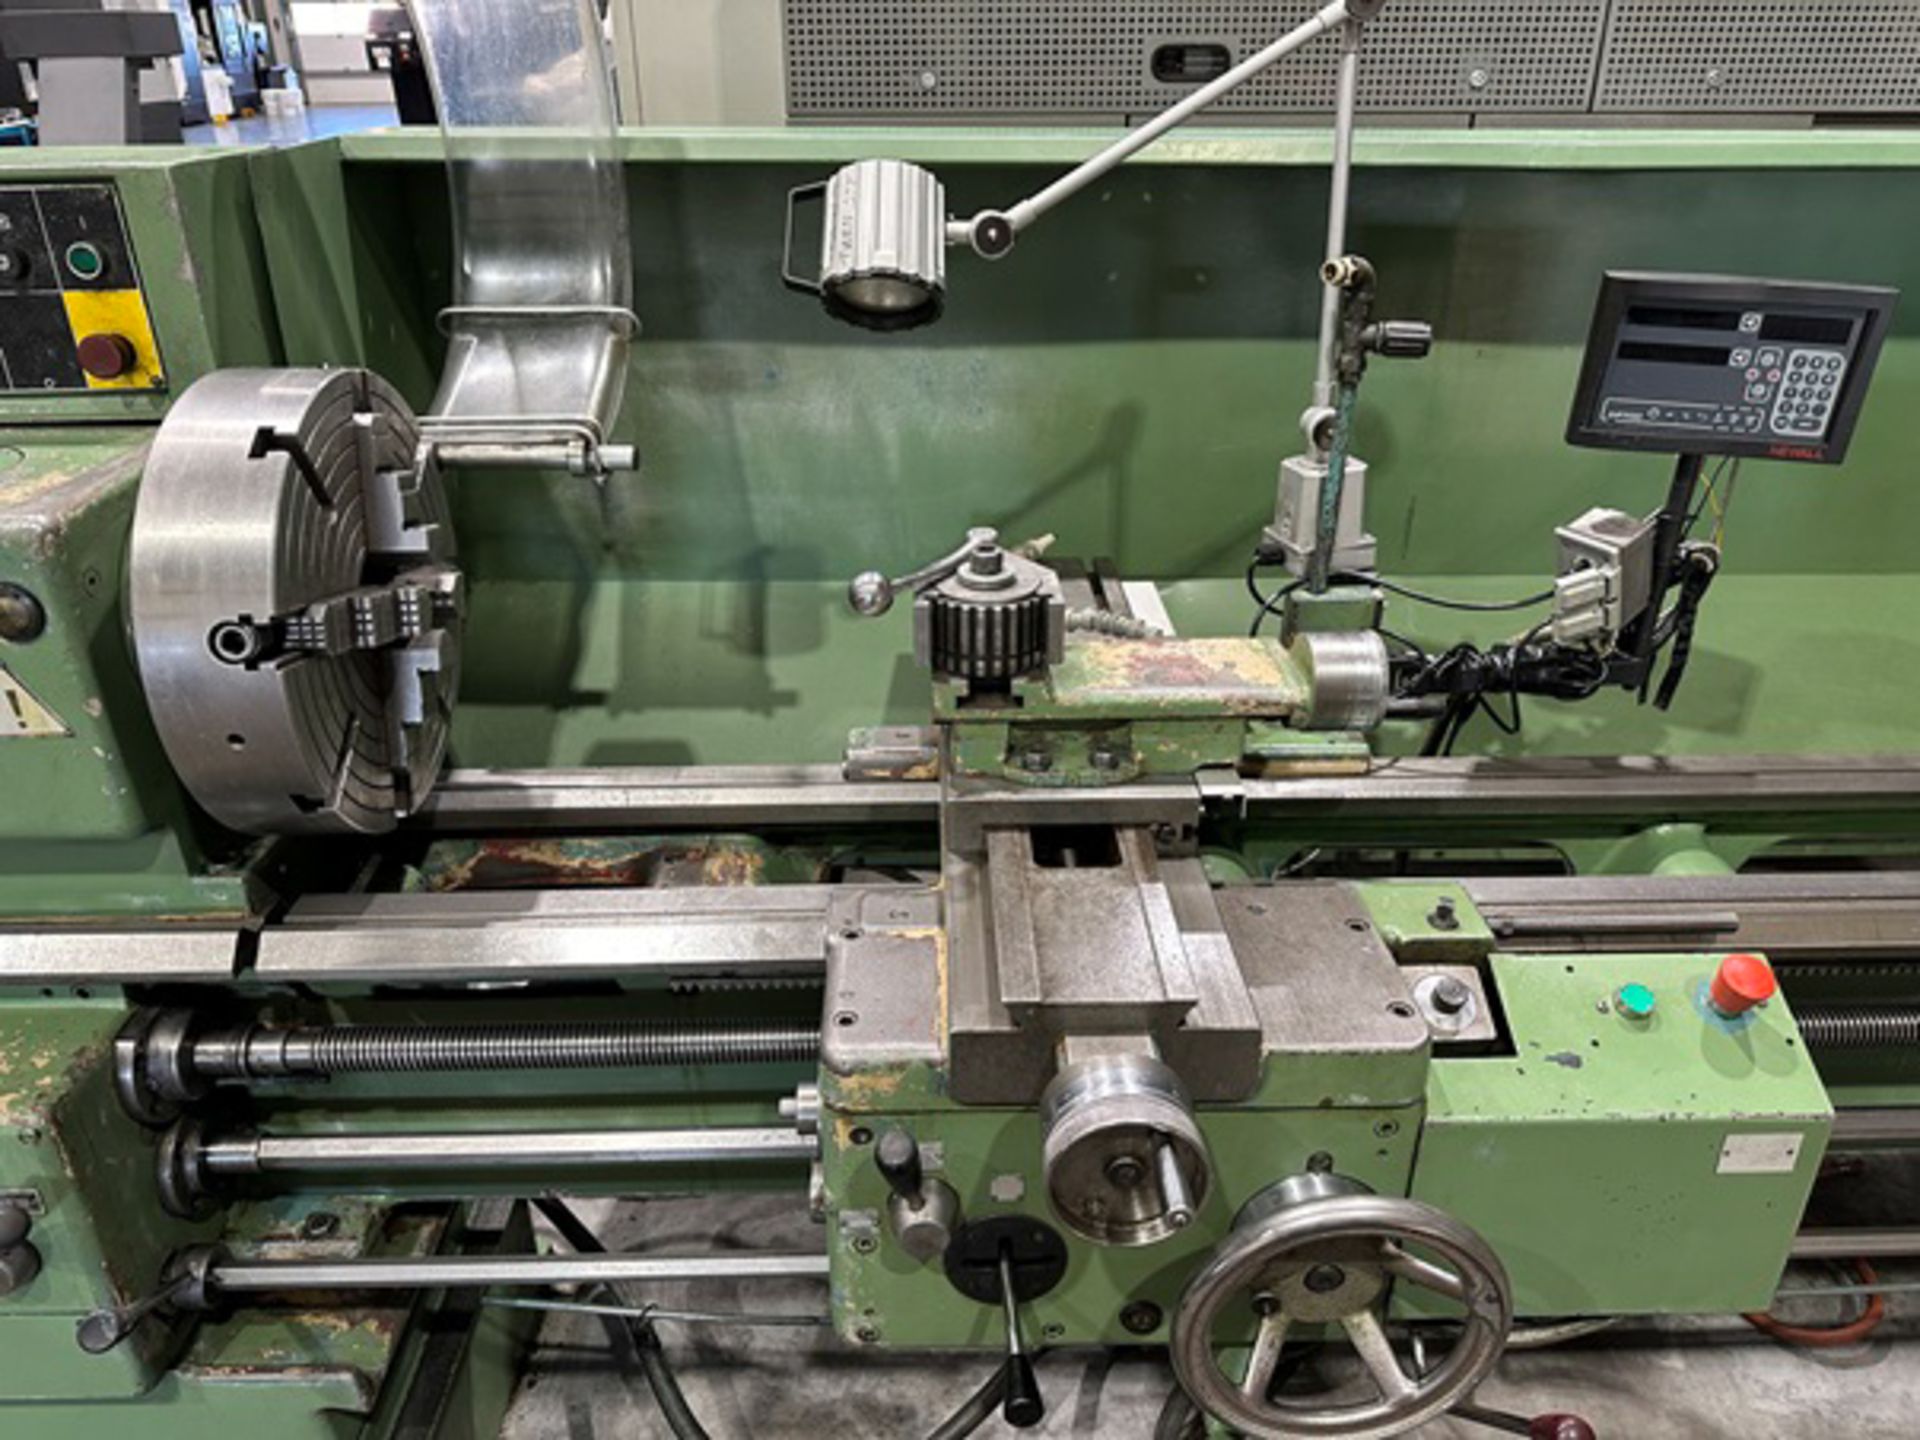 TOS SN50CX2000 GAP BED ENGINE LATHE WITH 20" SWING OVER BED, 27.5" SWING IN GAP, 80" DISTANCE - Image 9 of 16